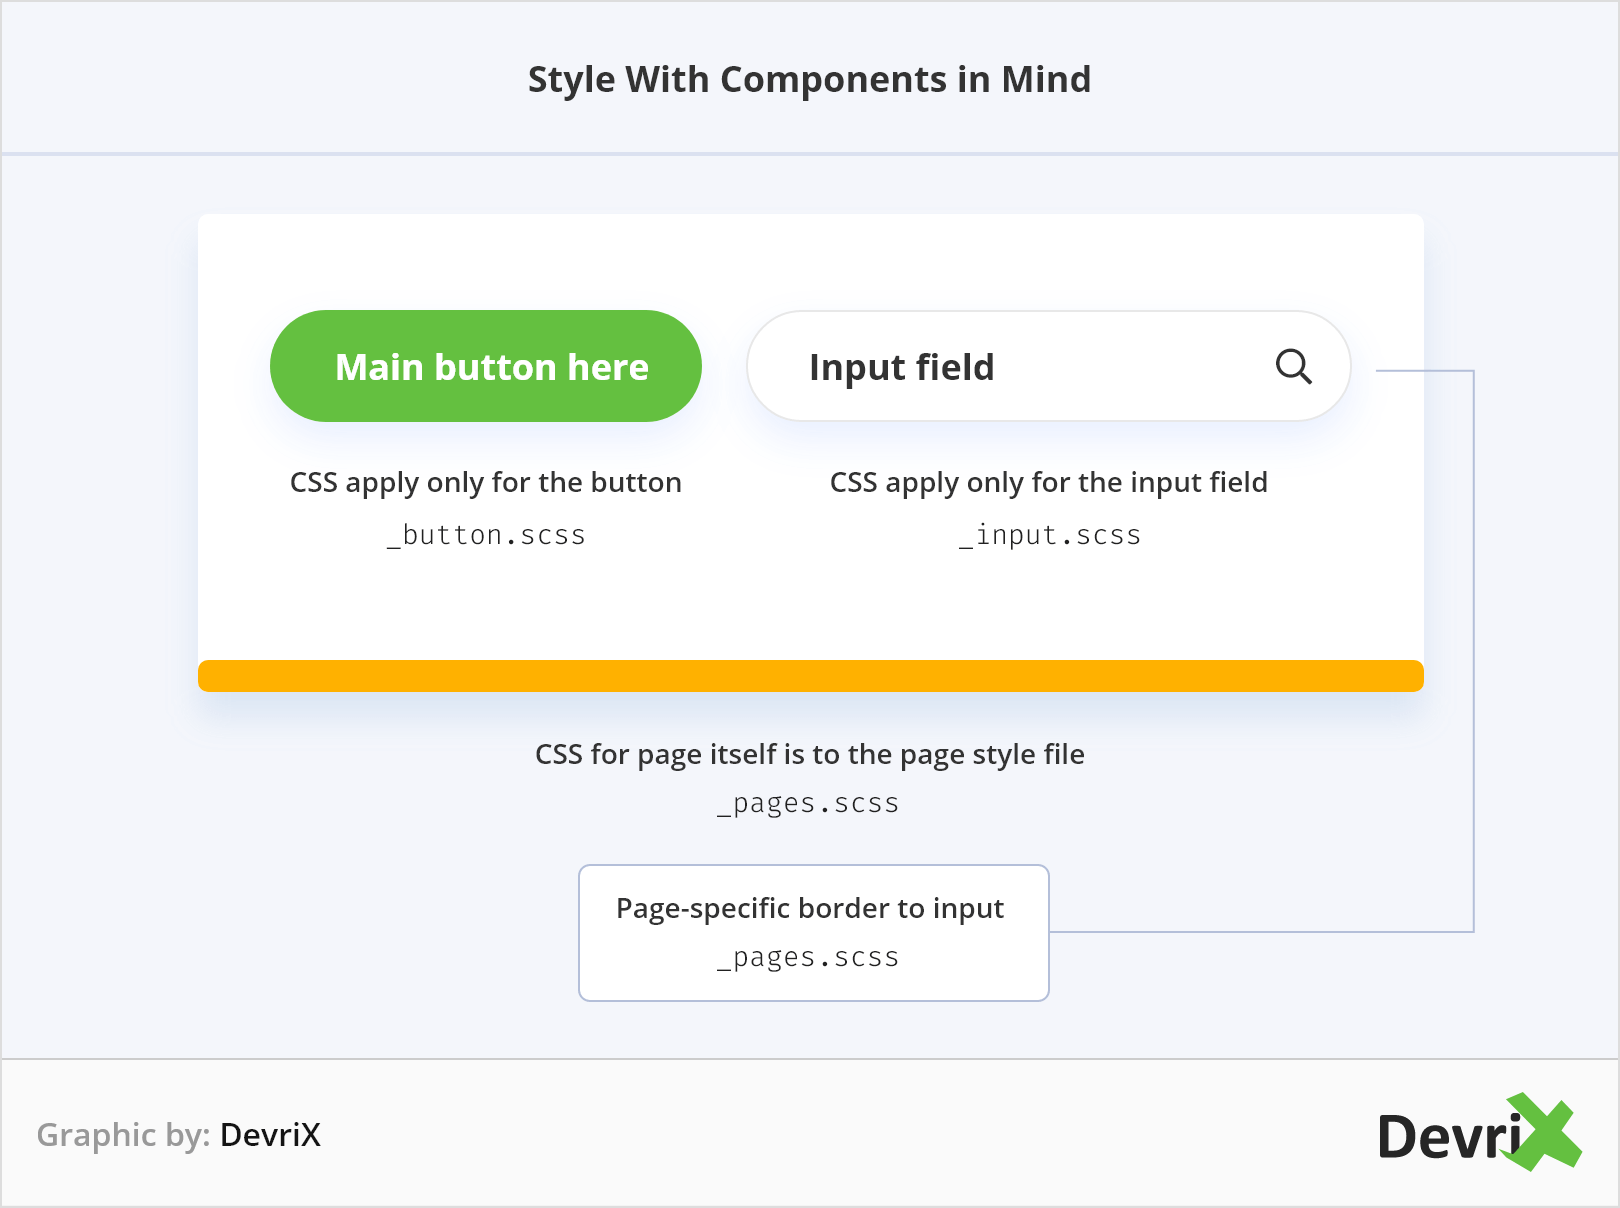 Style with components in mind